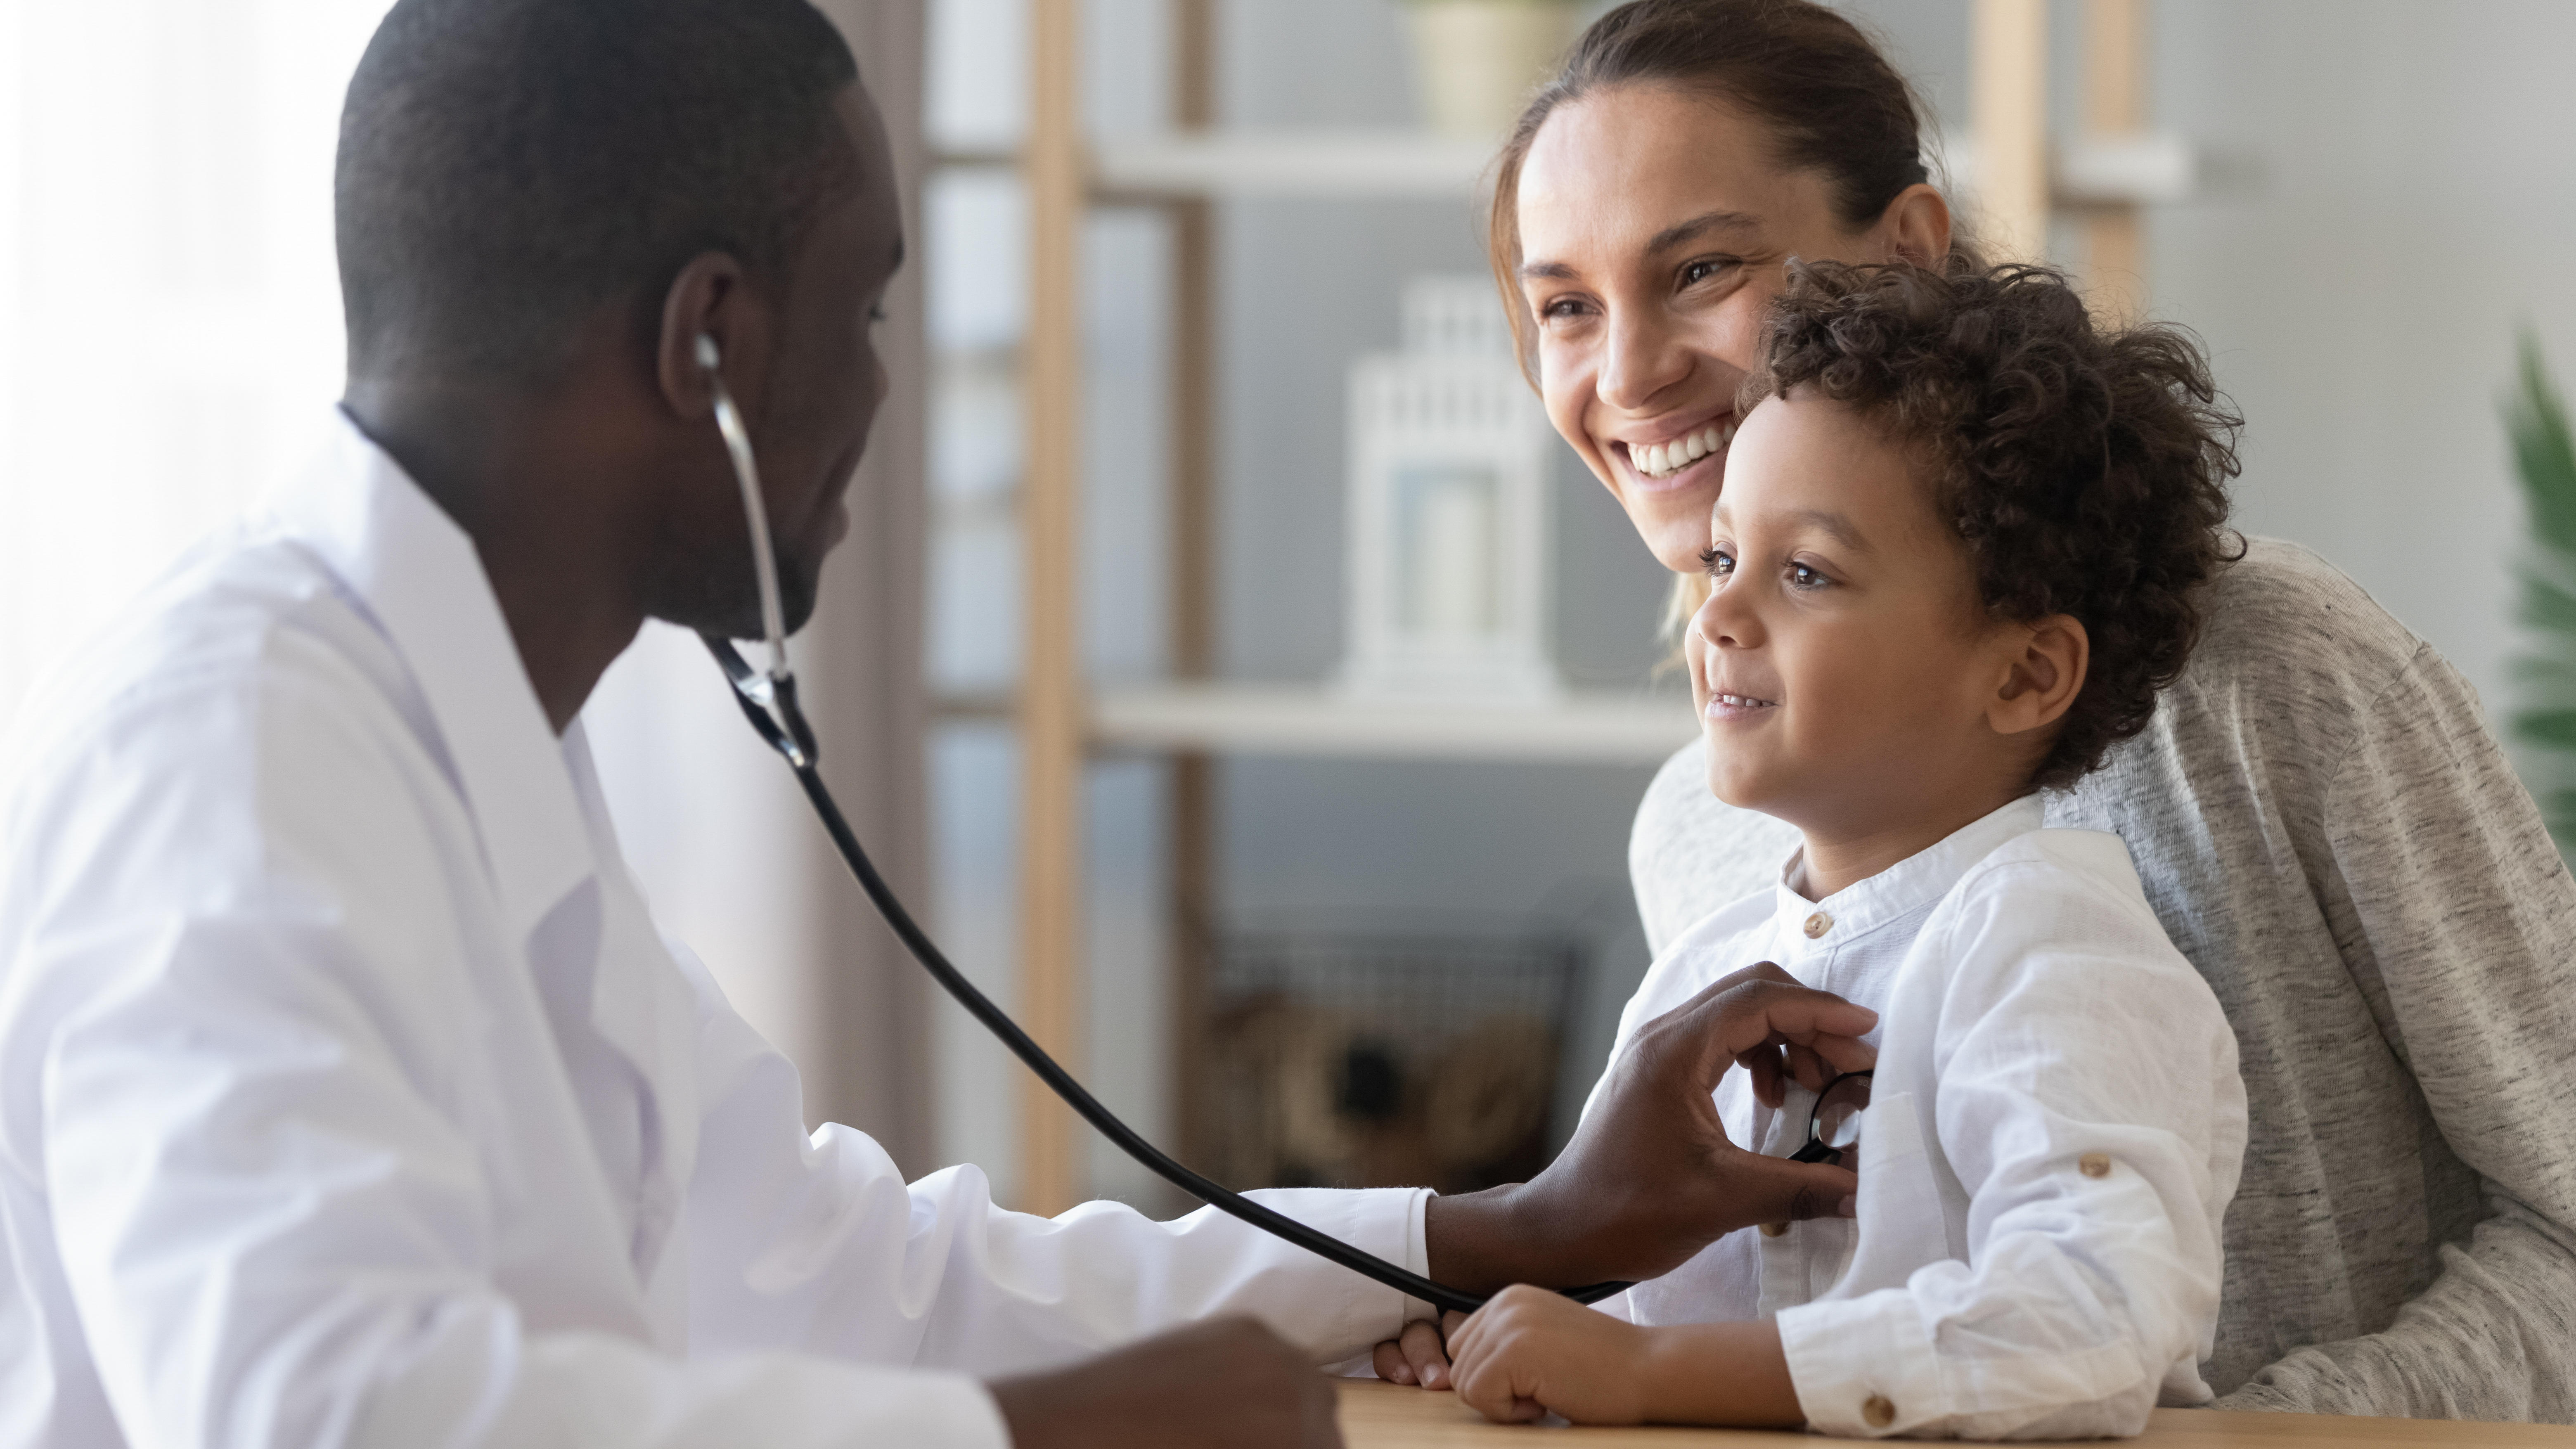 Doctor using stethoscope to listen to child's chest